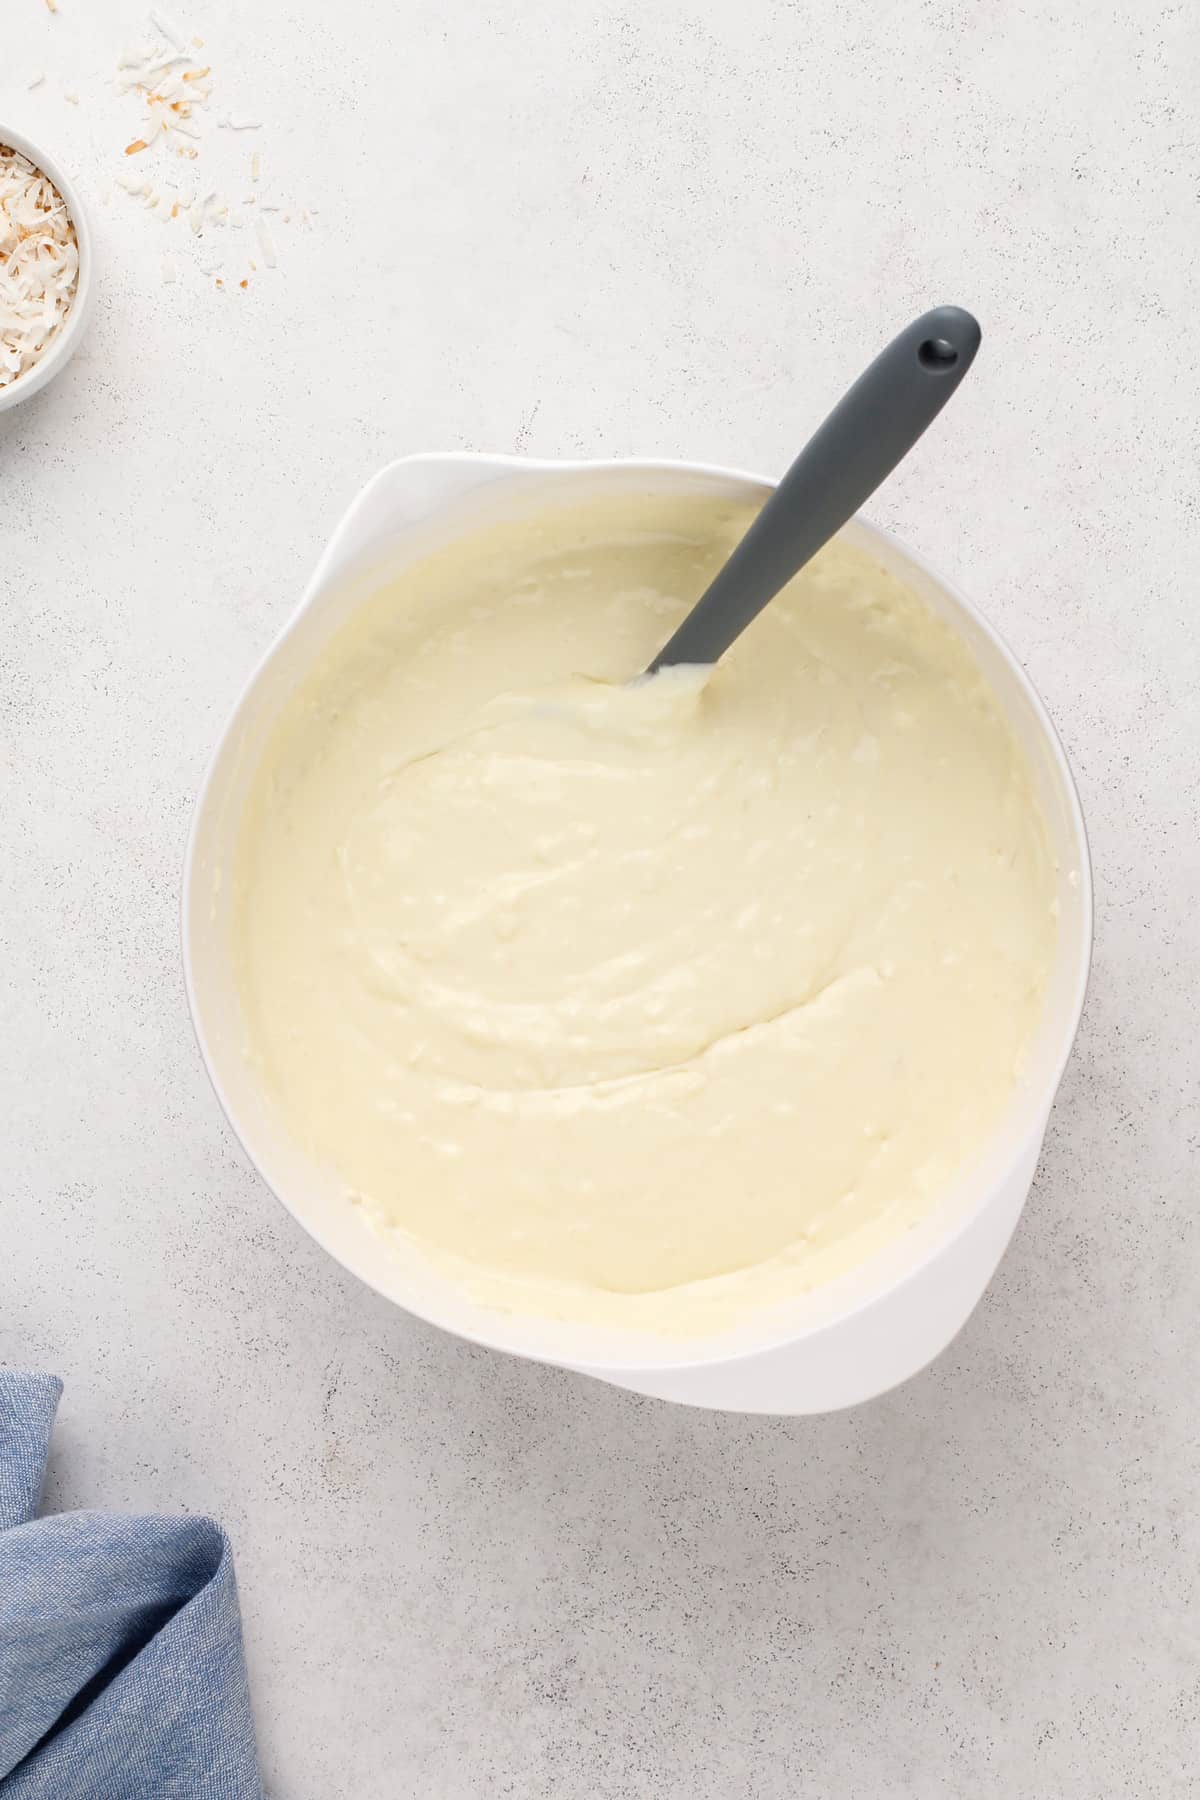 Eggs mixed into coconut cheesecake batter.